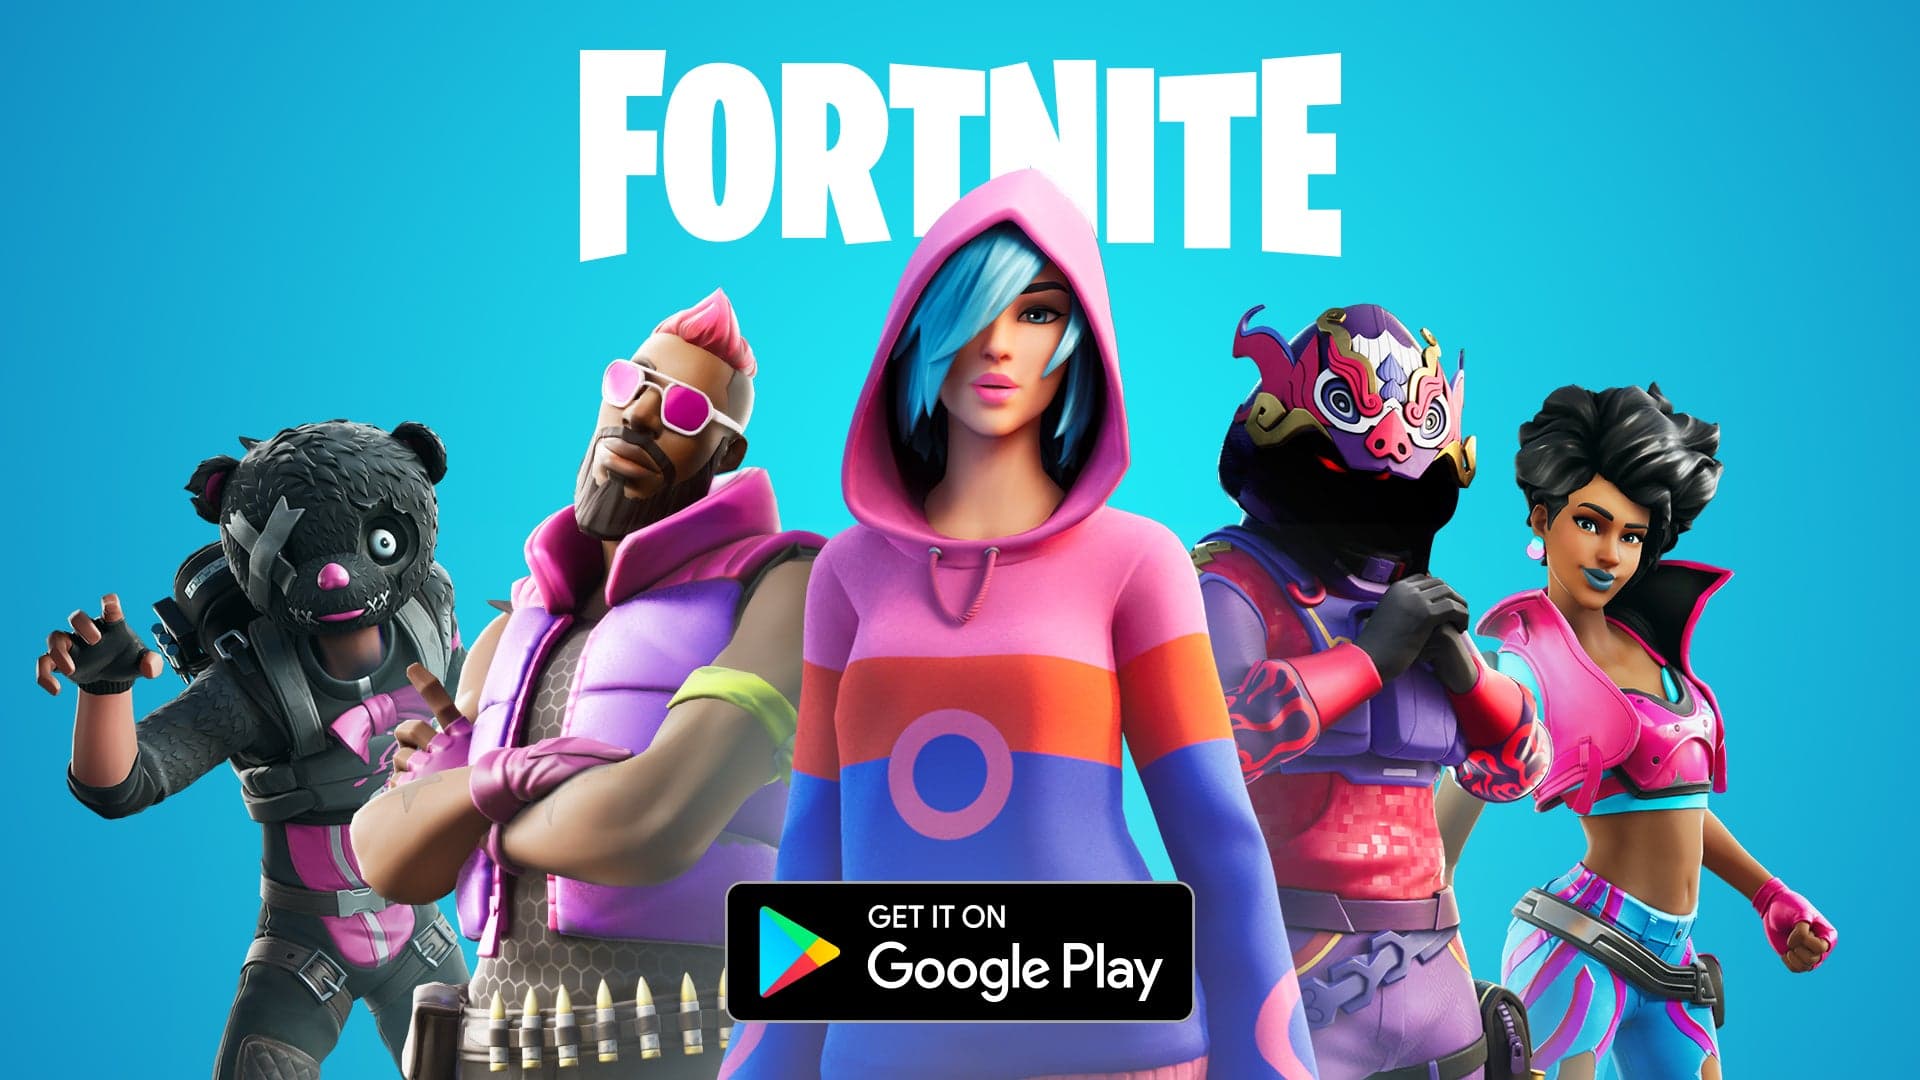 Top 5 Best Battle Royale Games For Android/iOS